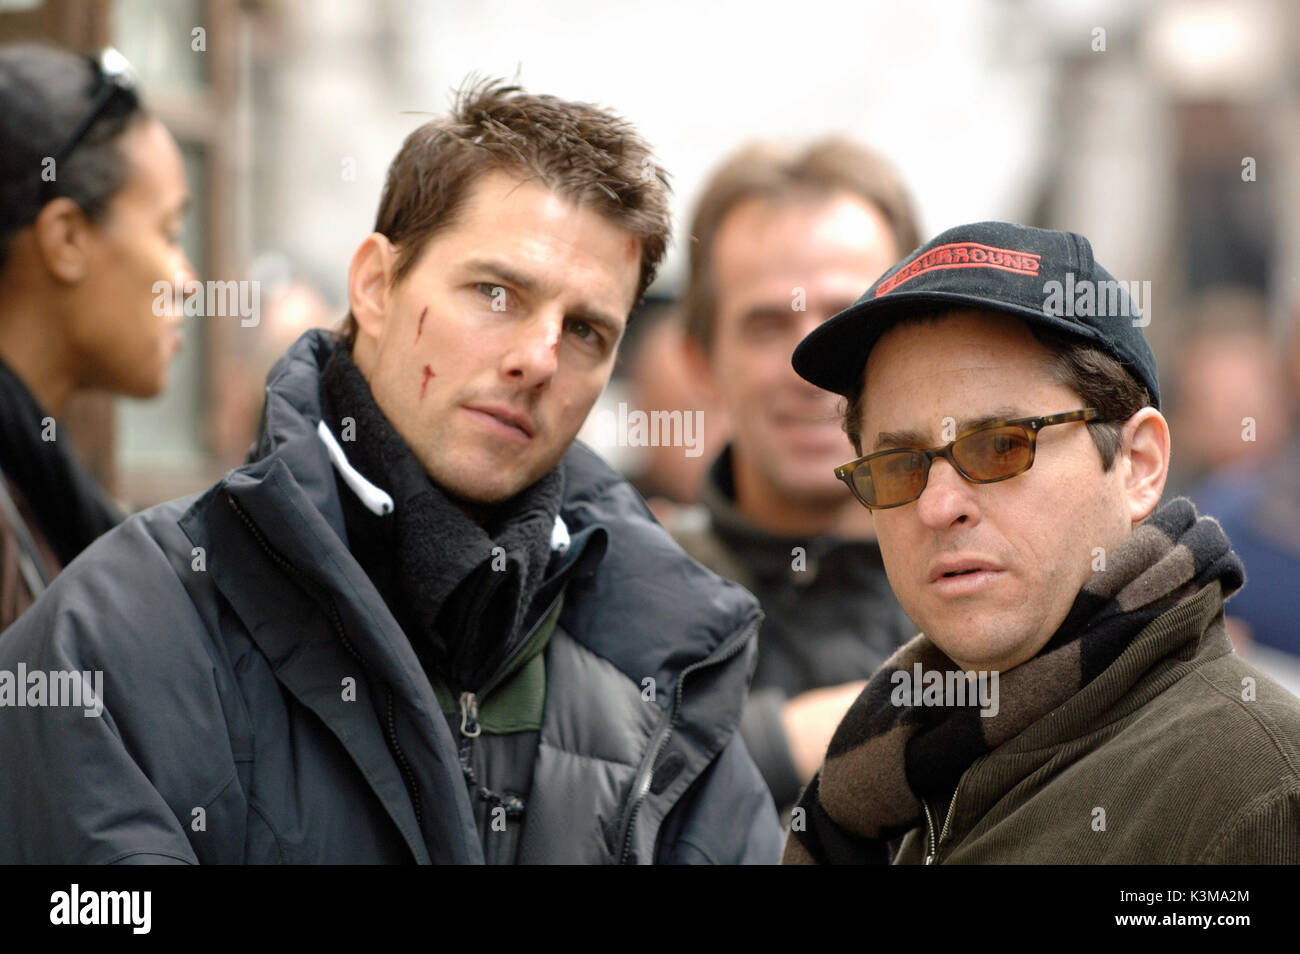 MISSION: Impossible III MIT TOM CRUISE, Regisseur JJ Abrams Mission: Impossible III MIT TOM CRUISE, Regisseur JJ Abrams Datum: 2006 Stockfoto